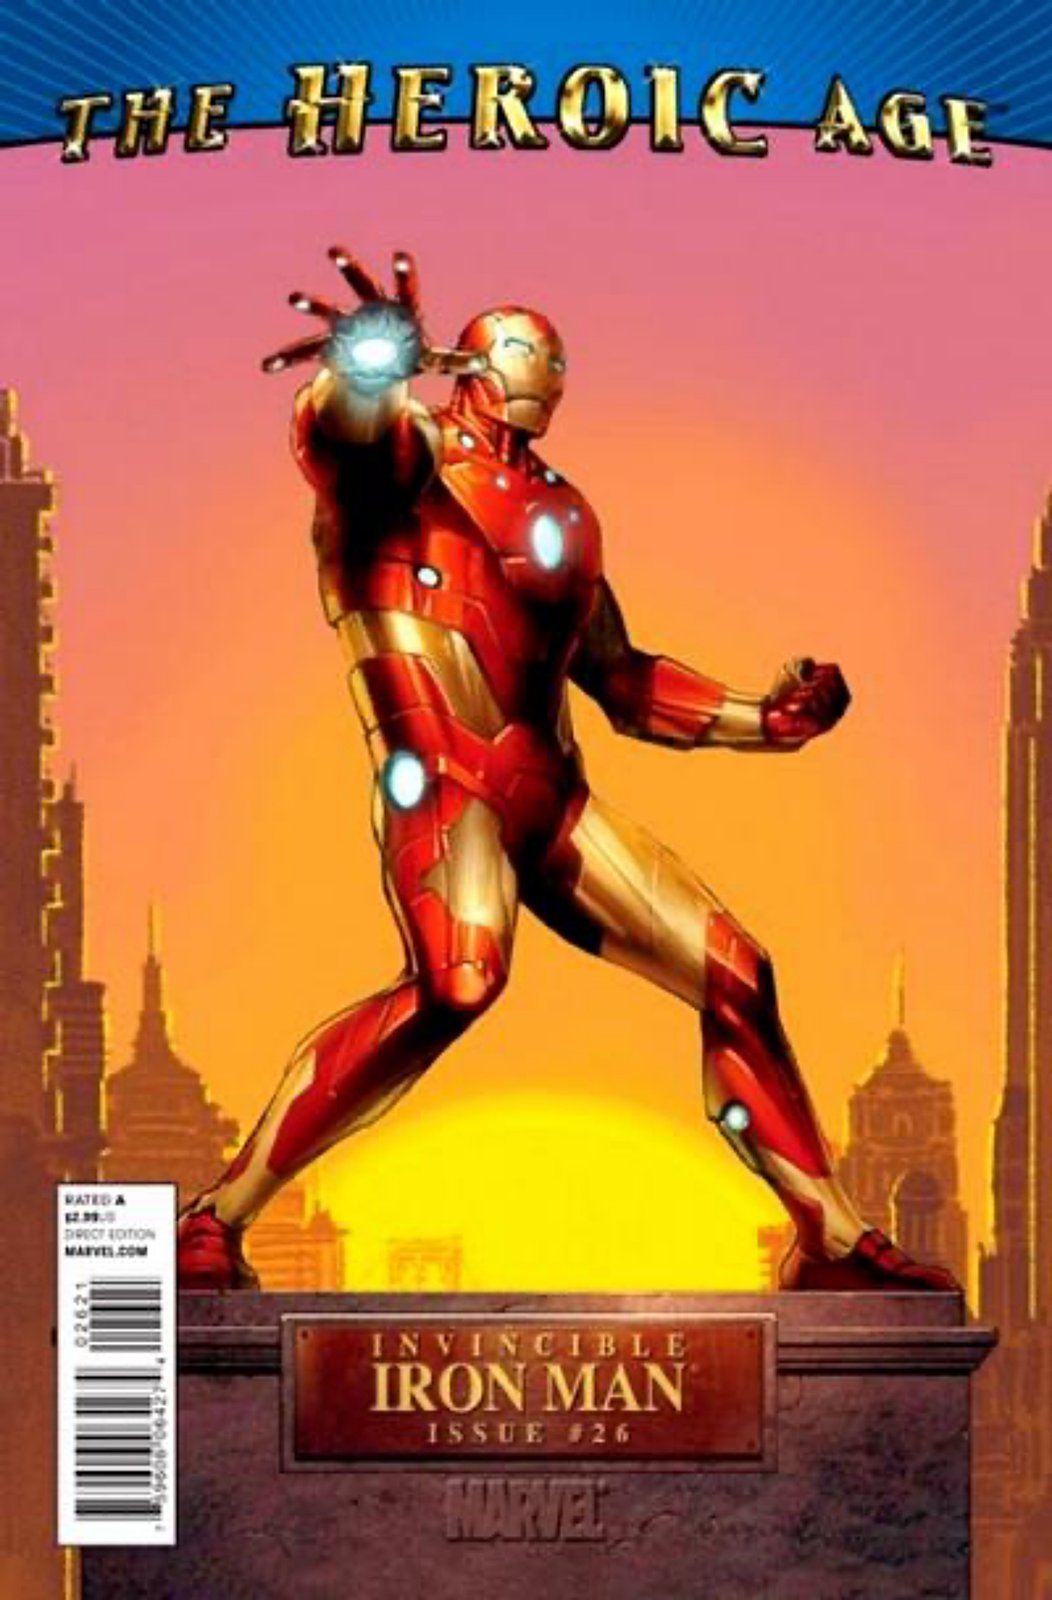 Invincible Iron Man #26 Heroic Age Variant Cover (2008-2012) Marvel Comics